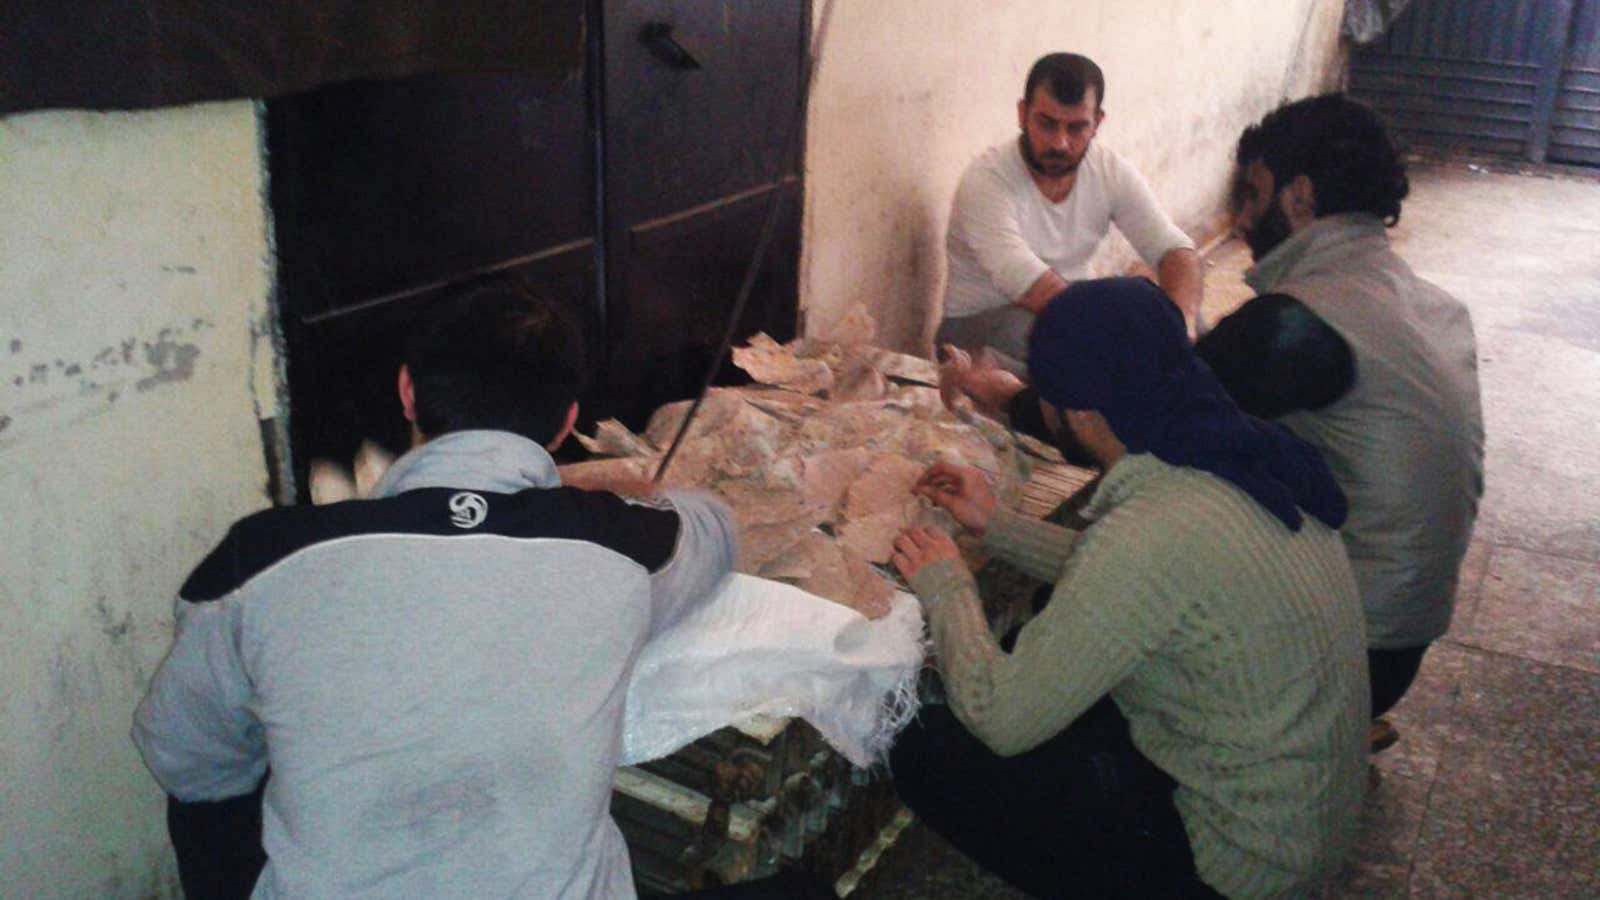 Inmates in Hama Central Prison scrape mold off dry bread, after taking over the prison. Supplies are running low.